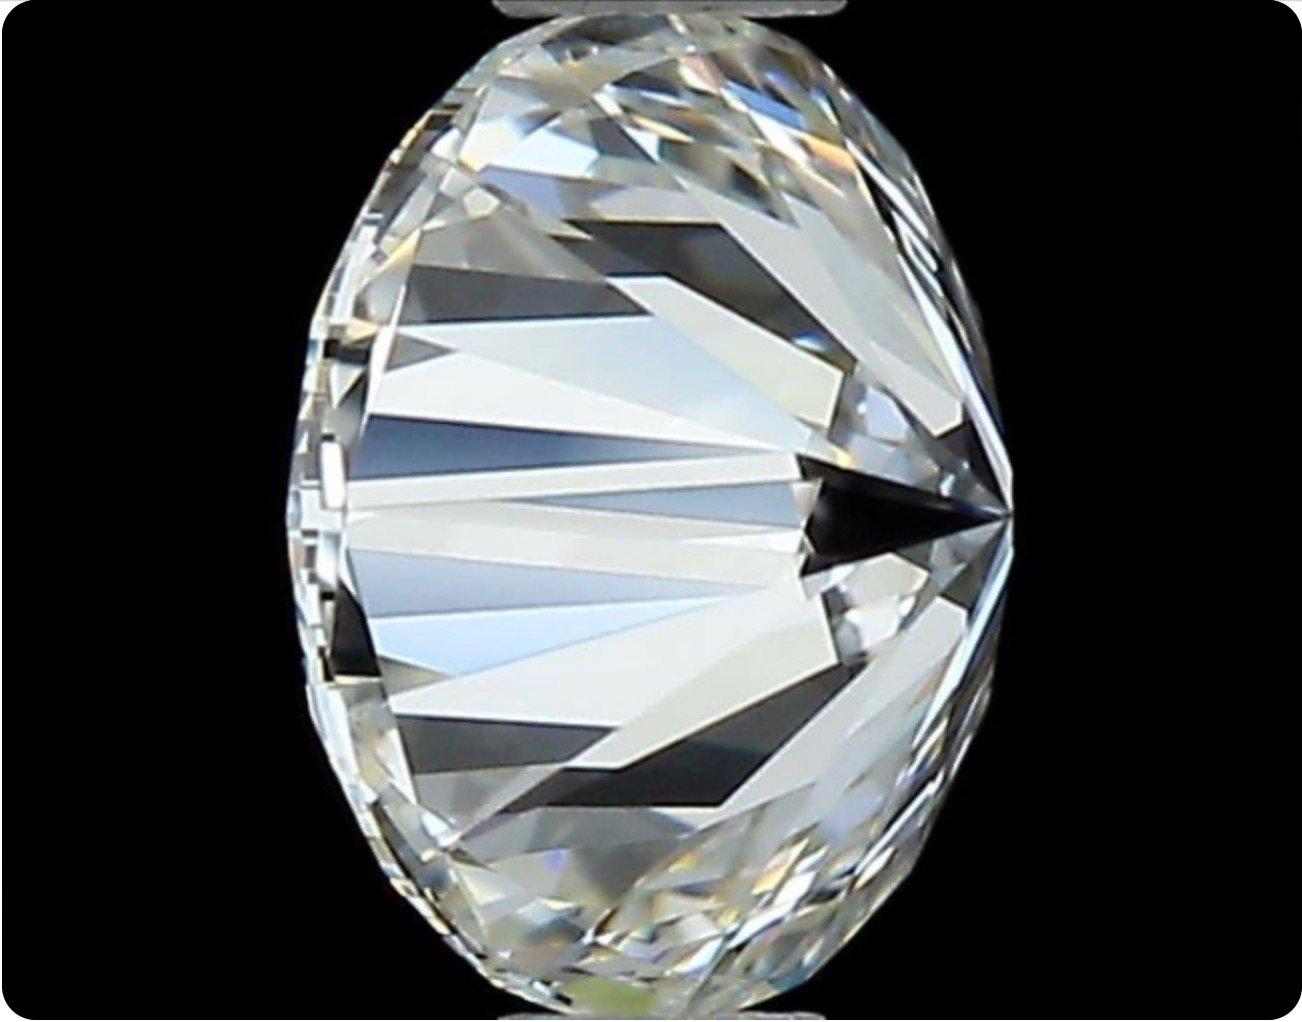 Women's or Men's Sparkling 1 pc Natural Diamond 1.0 ct Round G VVS2 GIA Certificate For Sale